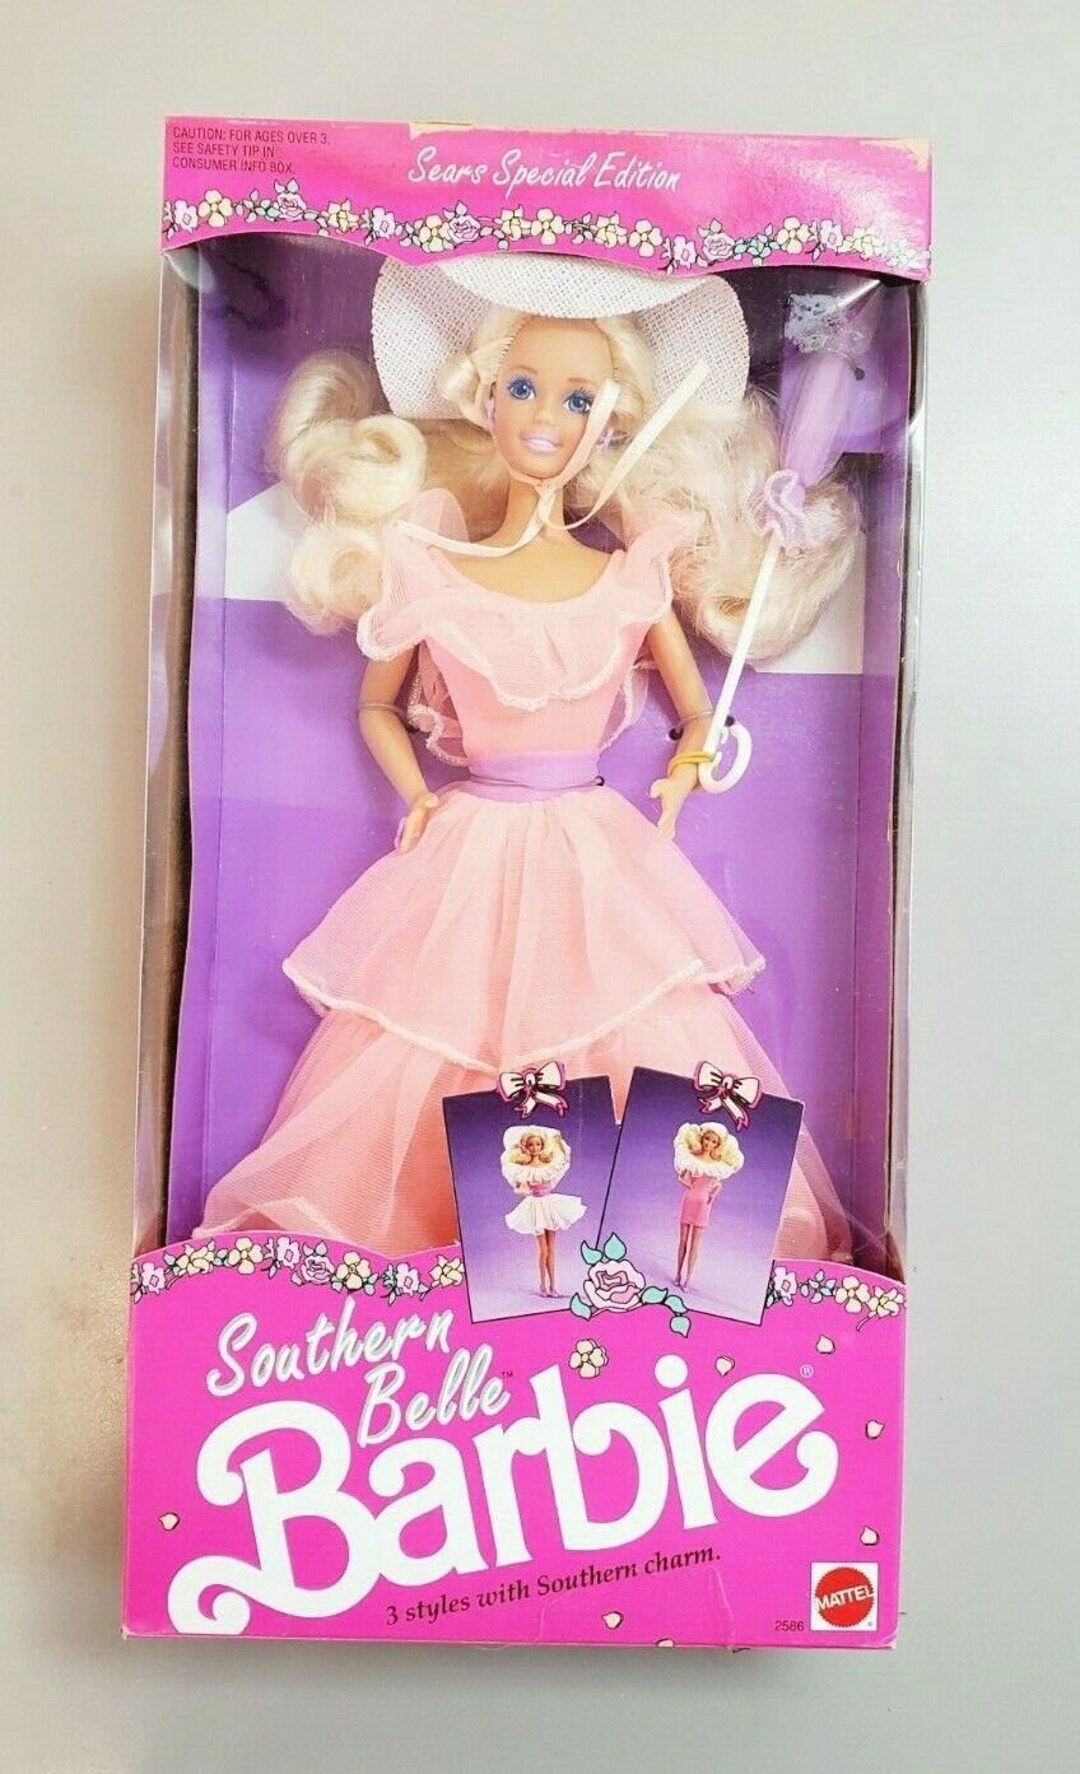 Southern Belle Barbie Doll 1991 Mattel Sears Special Edition - Etsy